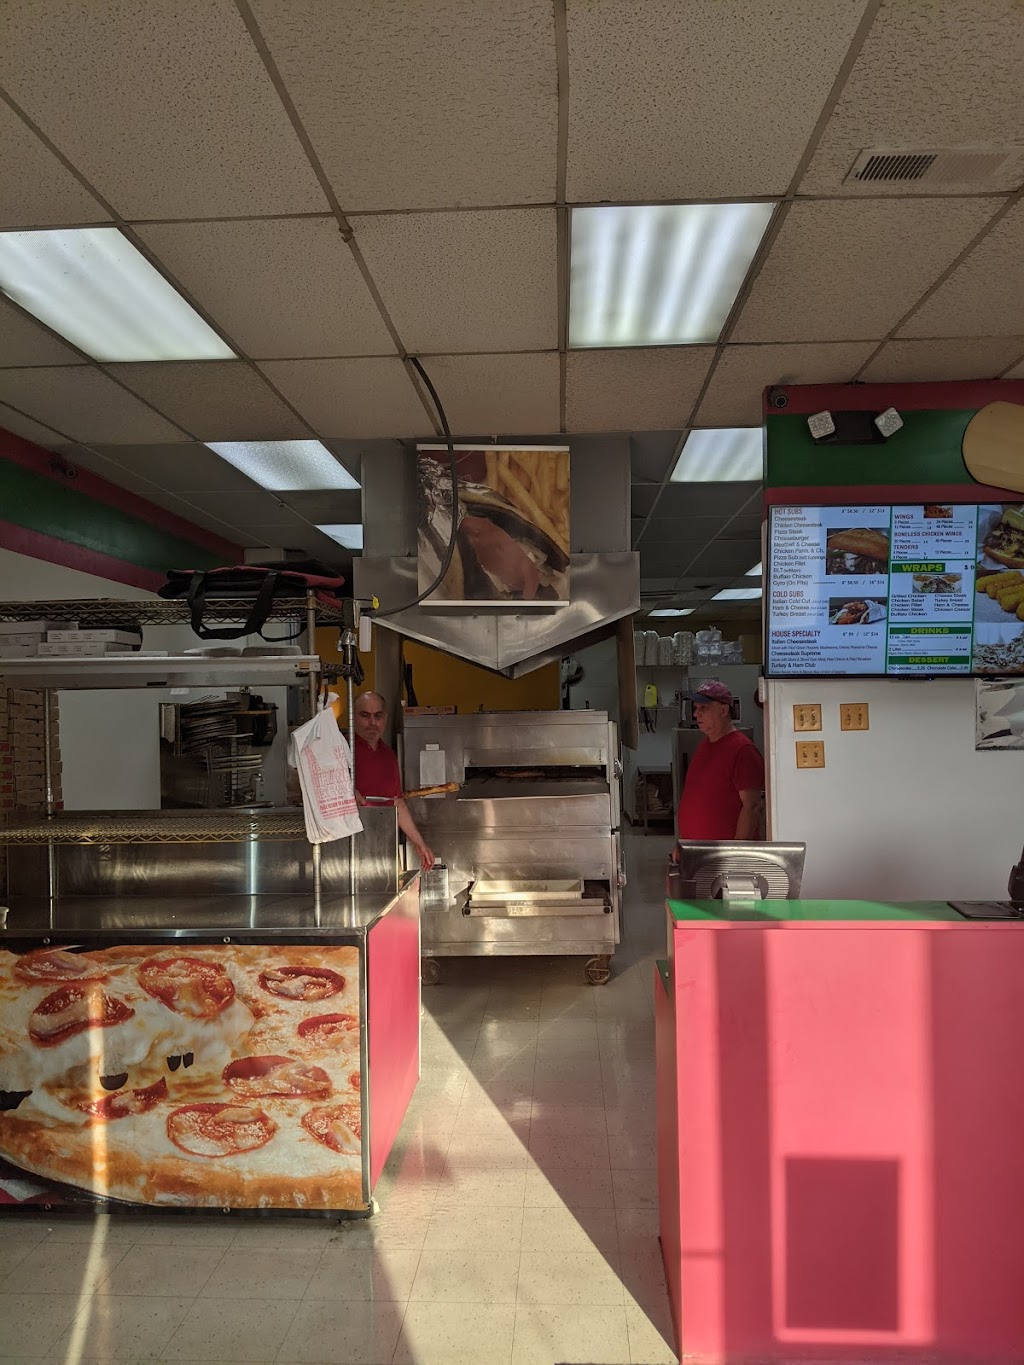 Mr Pizza & Subs | 2299 Johns Hopkins Rd, Gambrills, MD 21054, USA | Phone: (410) 721-6800